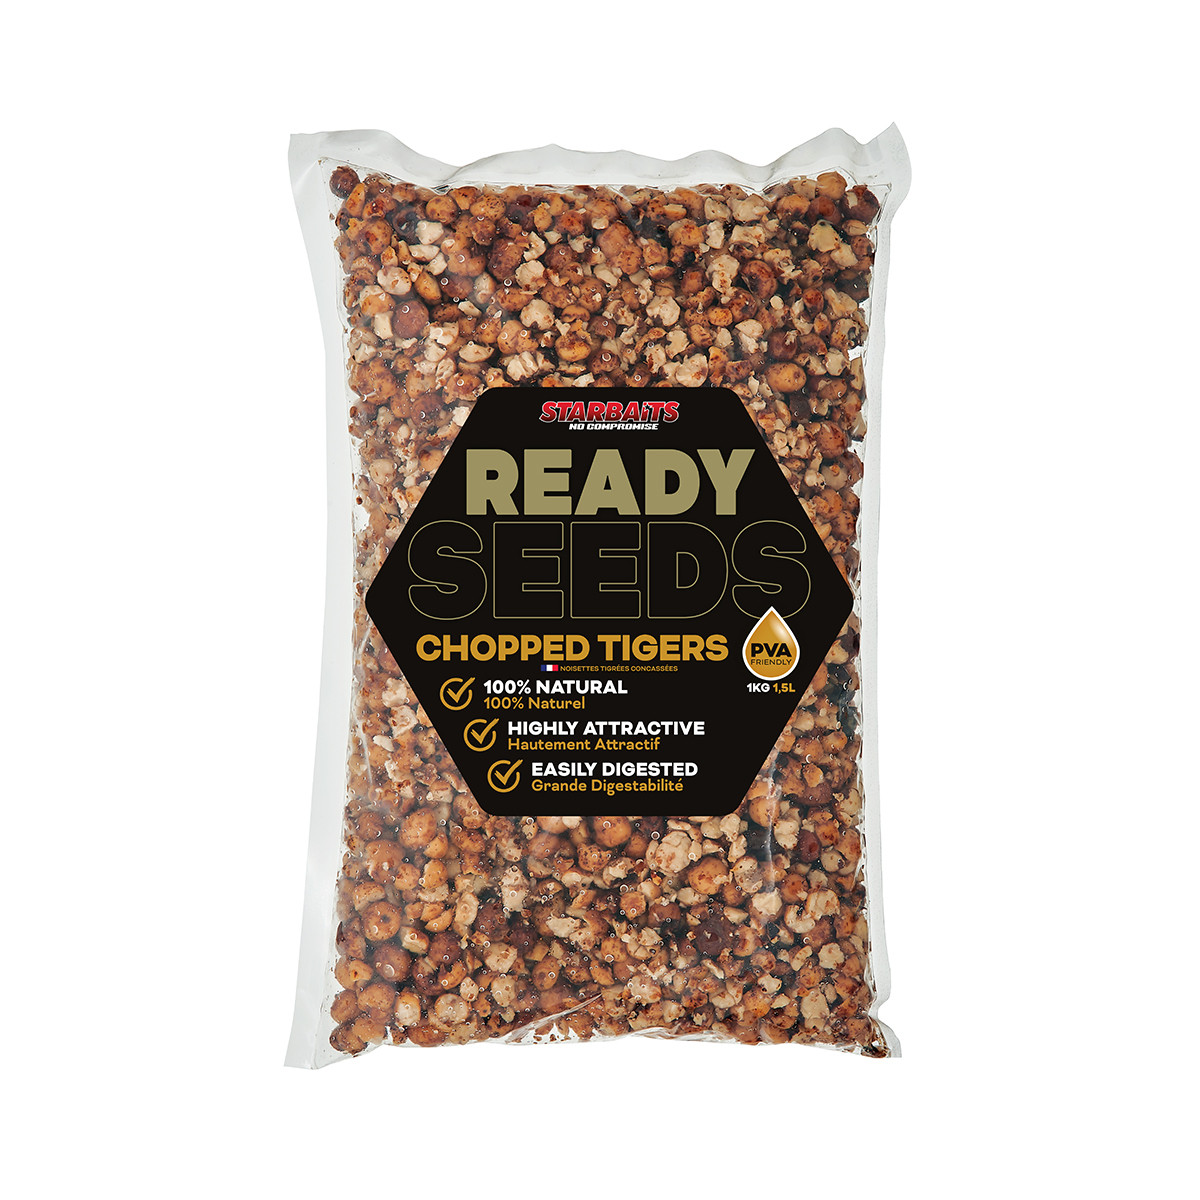 STARBAITS READY SEEDS CHOPPED TIGERS